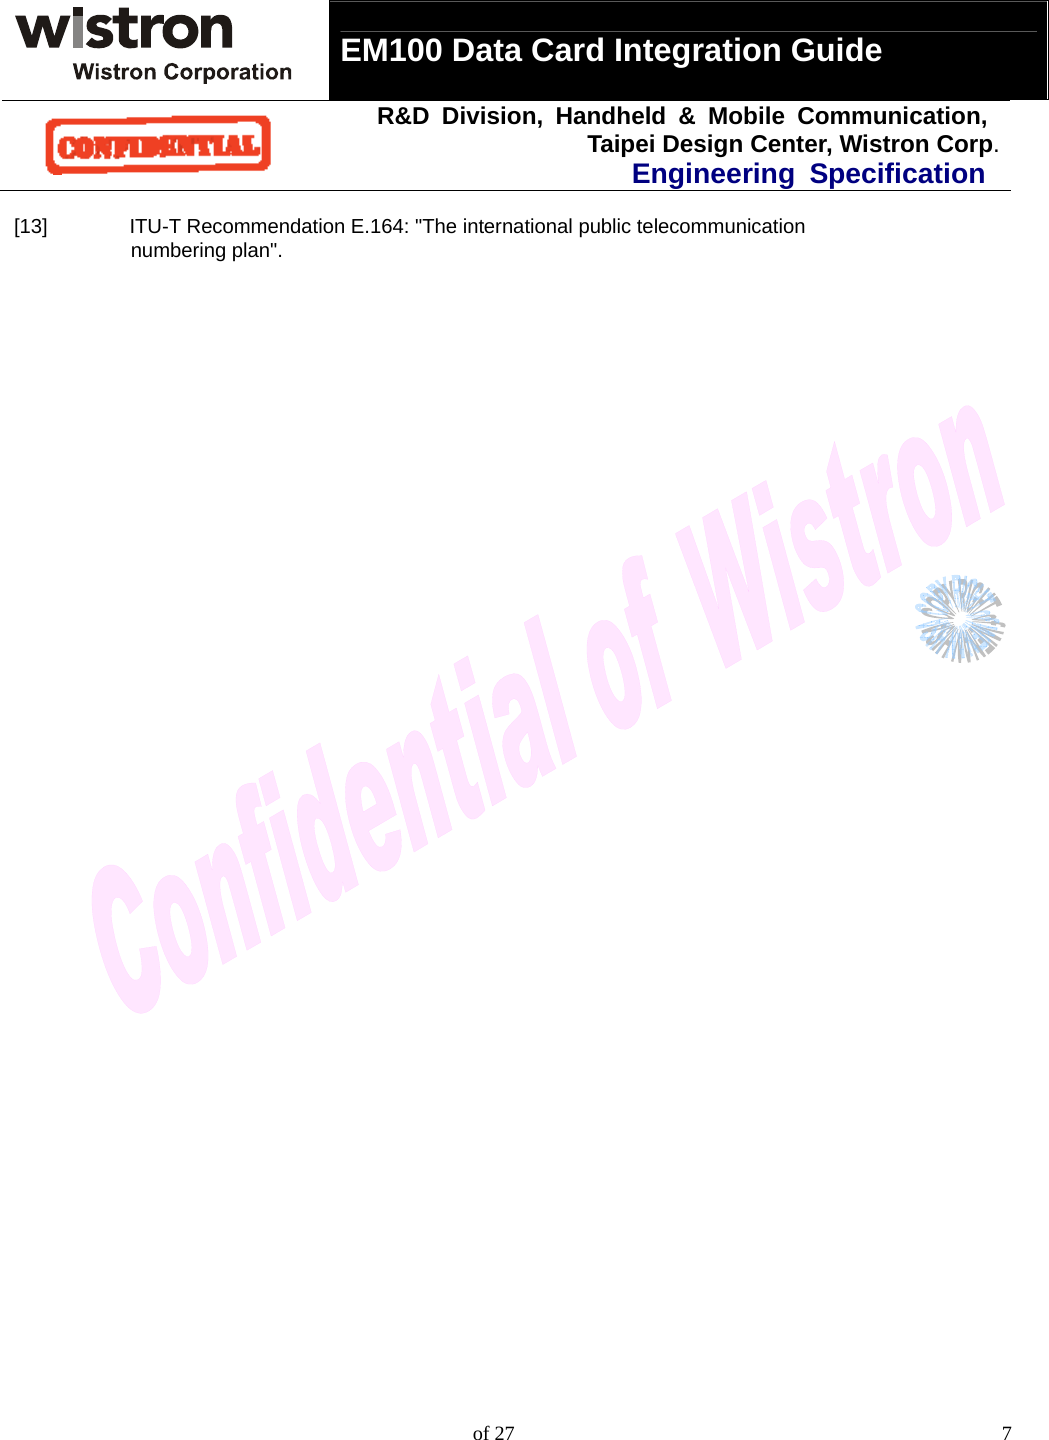  EM100 Data Card Integration Guide   R&amp;D Division, Handheld &amp; Mobile Communication, Taipei Design Center, Wistron Corp.Engineering Specification    of 27  7[13]  ITU-T Recommendation E.164: &quot;The international public telecommunication numbering plan&quot;. 